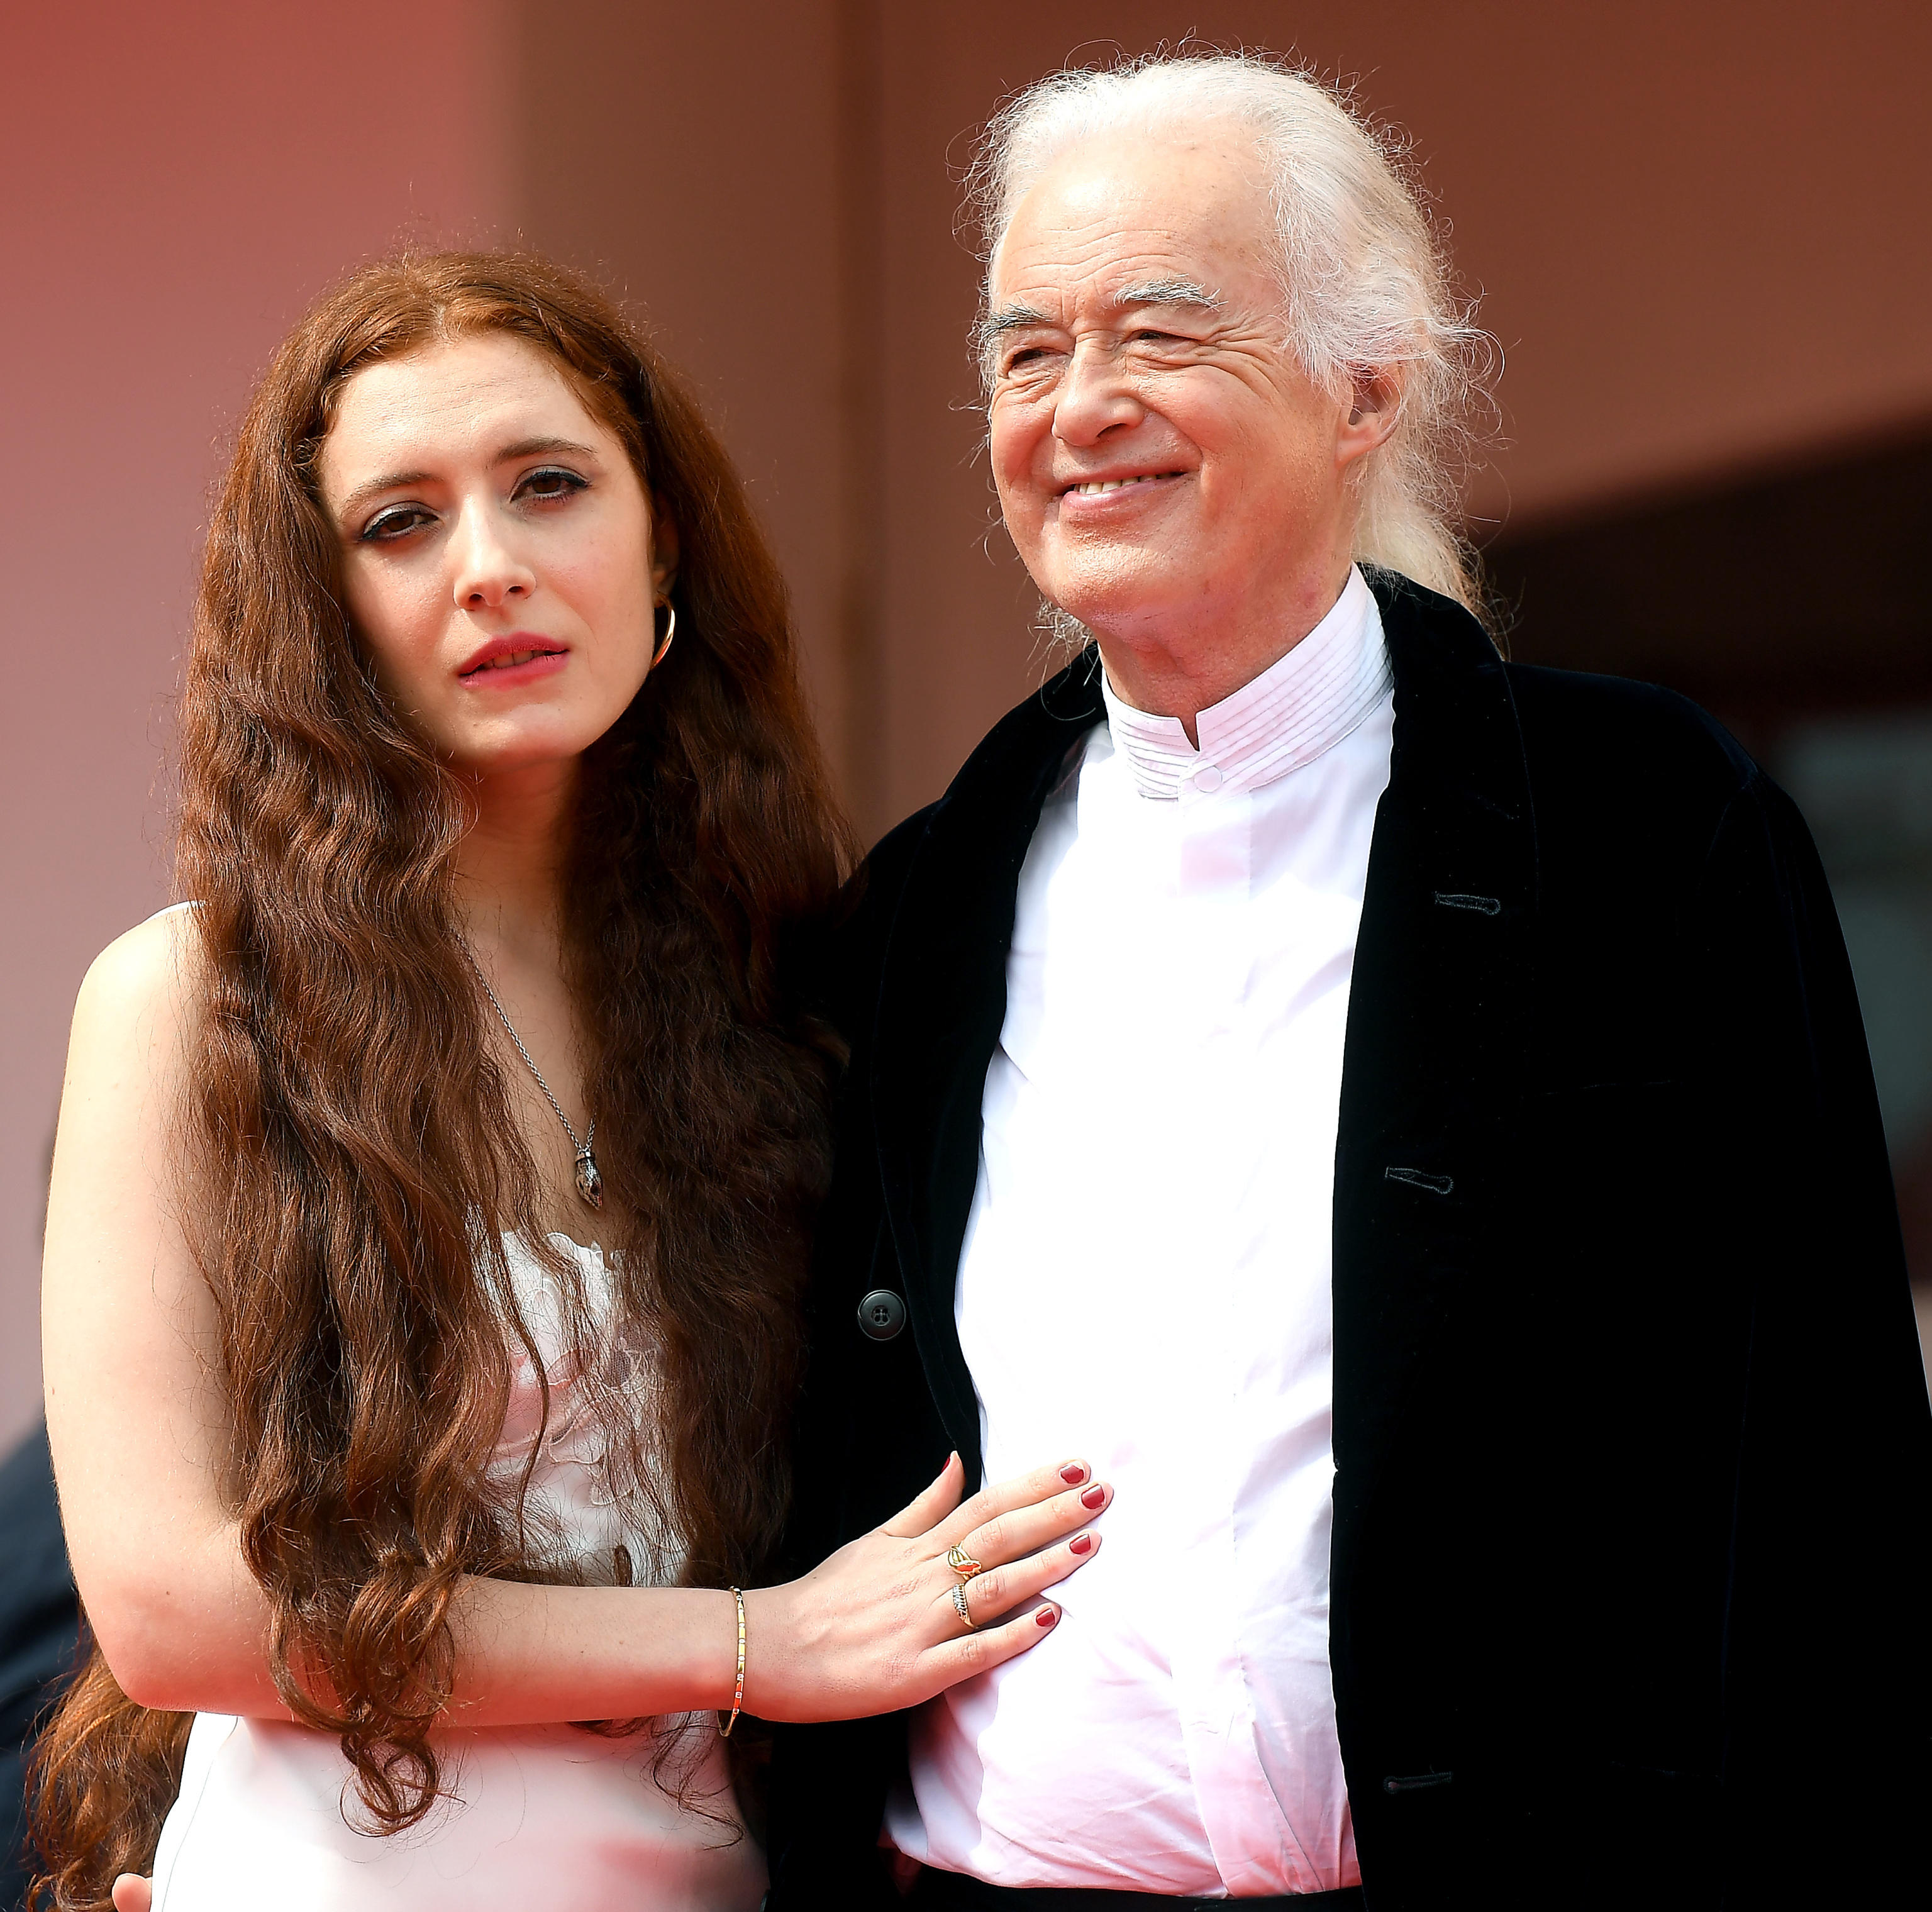 <p>Led Zeppelin guitarist Jimmy Page -- who turns 78 on Jan. 9, 2022 -- started dating Scarlett Sabet, who's 45 years his junior, after hearing her work at a poetry reading in a London bookshop in 2014. They've been together ever since: Scarlett, 32, is seen here with the rocker, then 77, at the <a href="https://www.wonderwall.com/celebrity/photos/venice-film-festival-2021-see-all-the-movie-stars-at-the-festival-491764.gallery">Venice Film Festival</a> in September 2021. "It's funny because on paper there is a massive difference. But when he's standing in front of me, it's not something I feel. It's not something that impedes us," the poet told Tatler in 2020. "I guess some people will say I've made an unusual choice. At the time it felt very uncomfortable. I felt like my life was going to be over. I had such a sense of shame about the whole thing." However, she added, "I'm in an amazing relationship. I think a lot of people make assumptions but Jimmy's an exceptional man, and beautiful. There are a lot of women of all ages who are excited to meet him. And I feel lucky, he really is my best friend and the person who makes me laugh the most."</p>